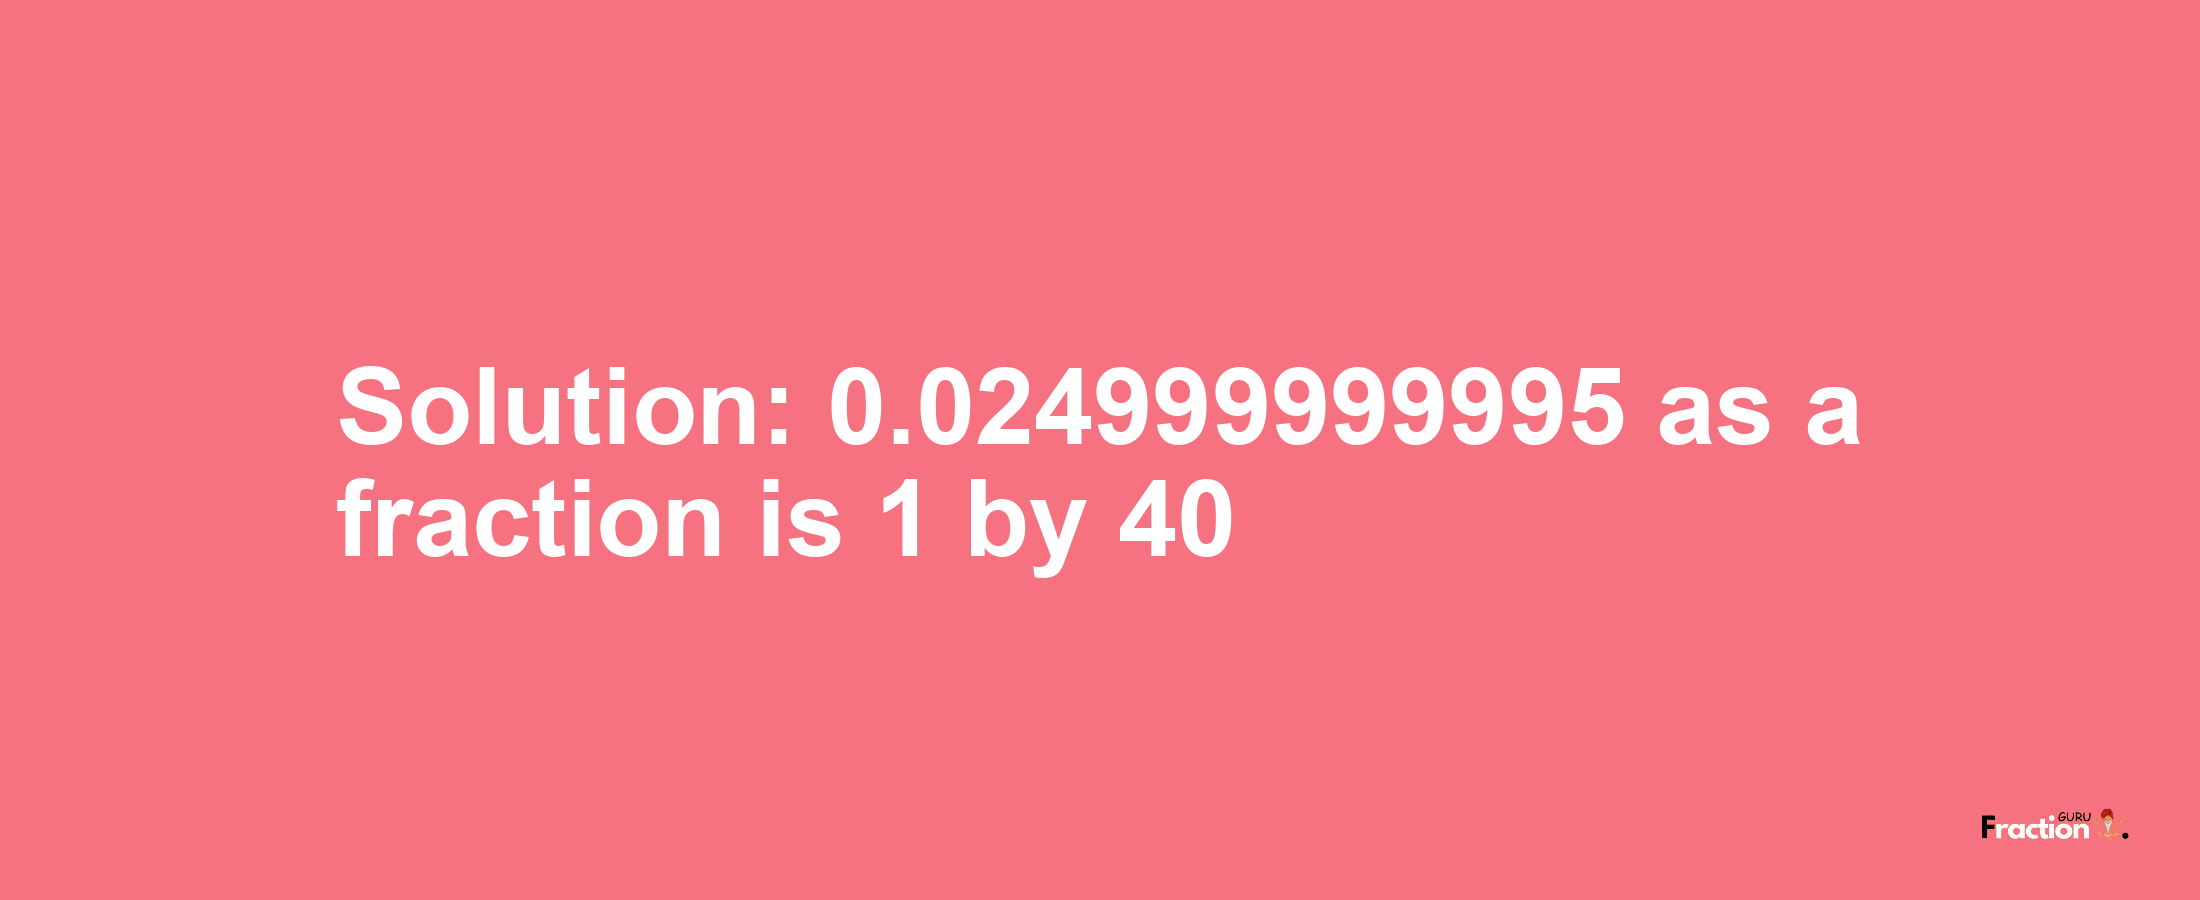 Solution:0.024999999995 as a fraction is 1/40